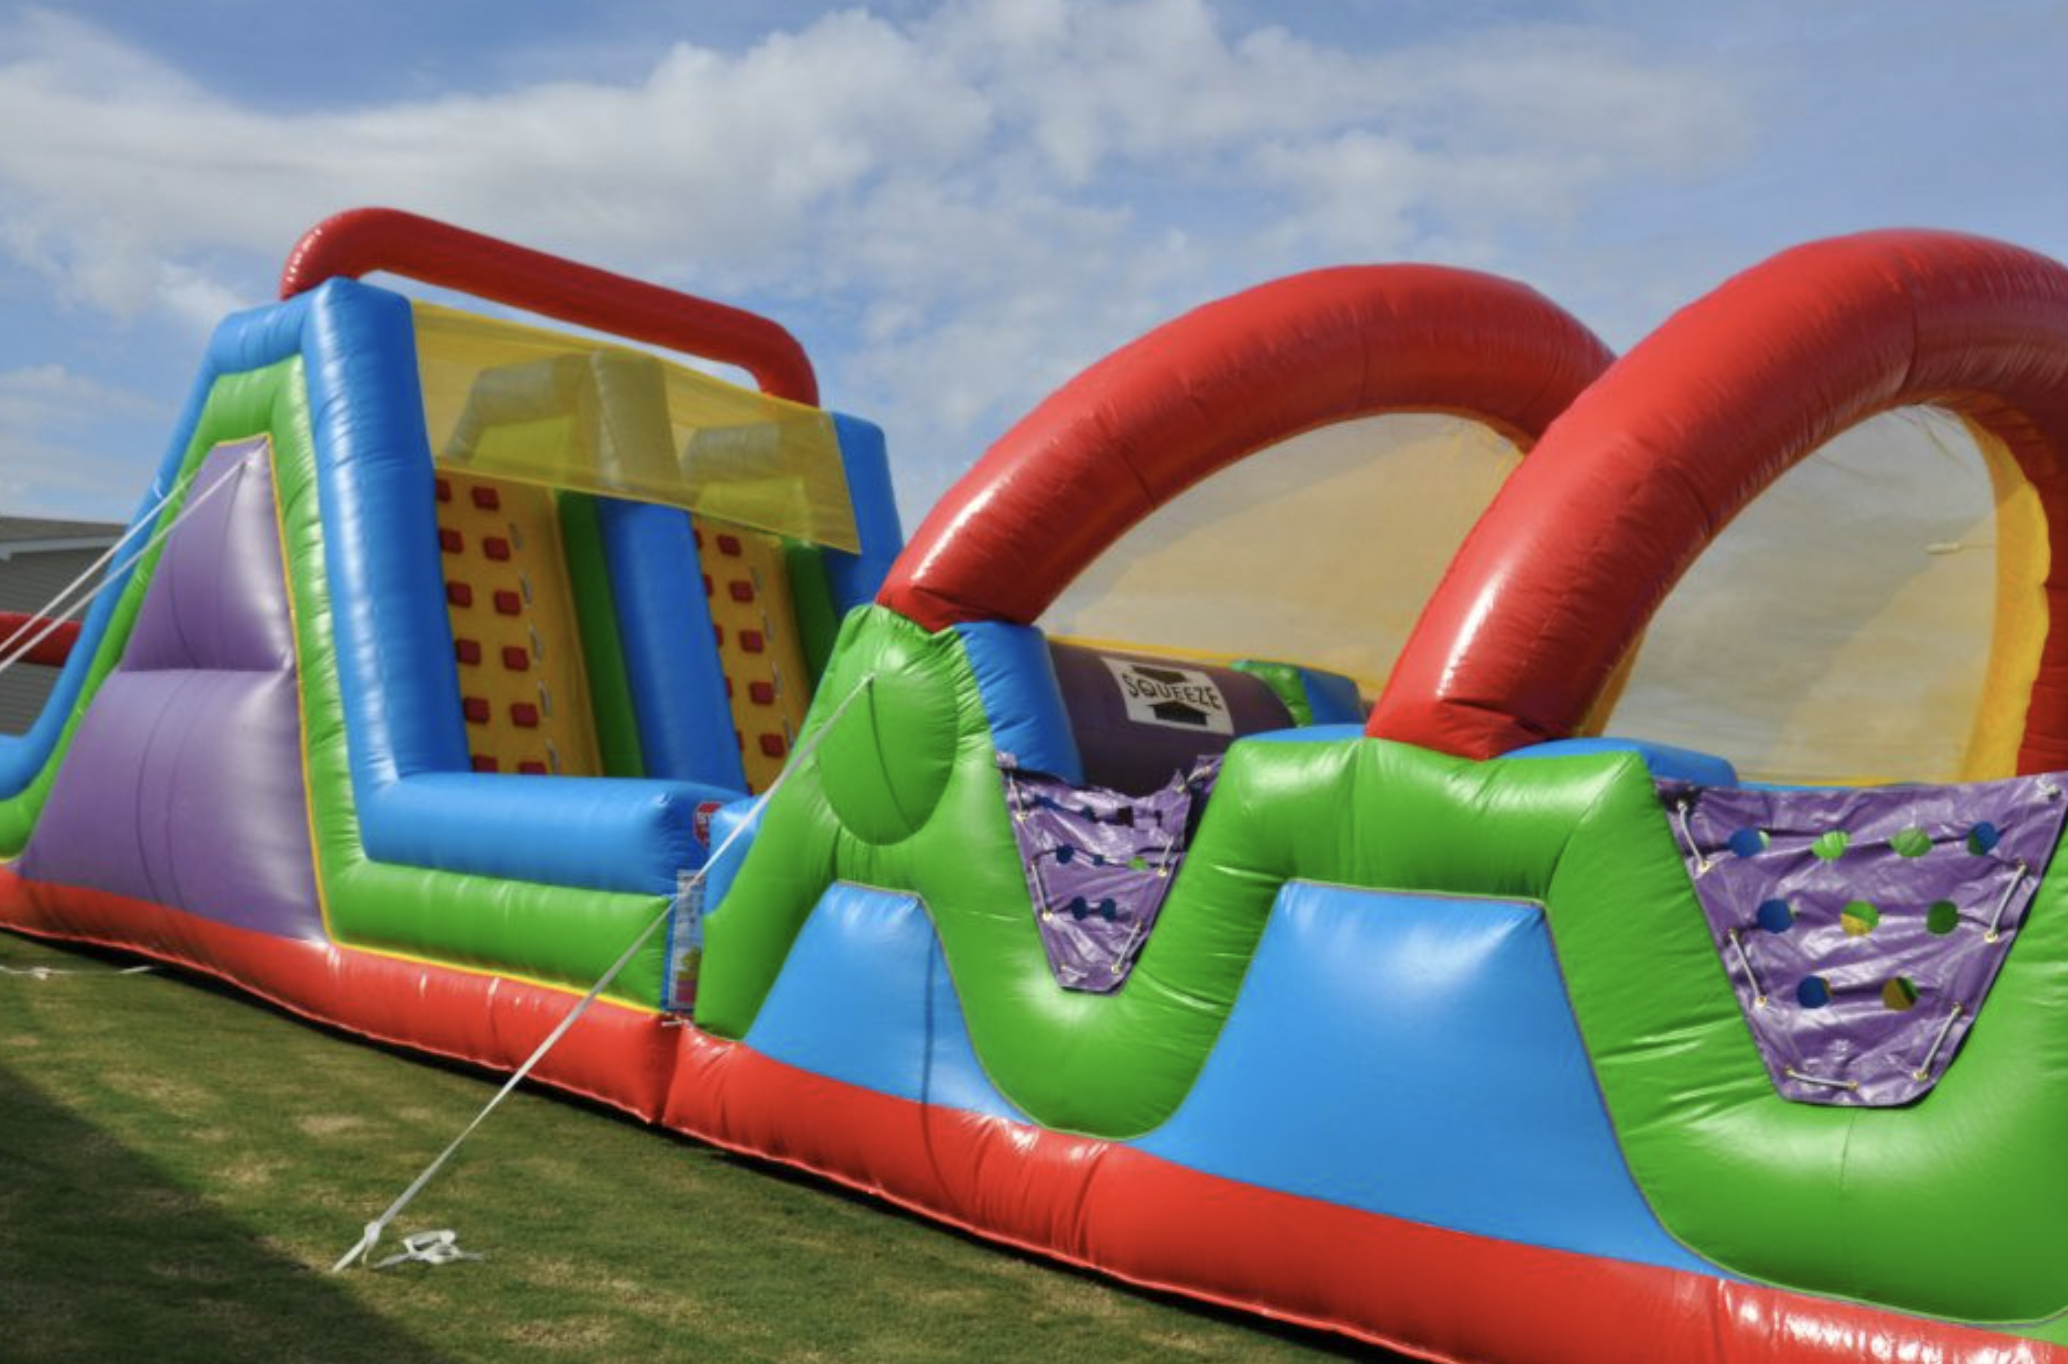 this image shows inflatable slides in Westminster, CO